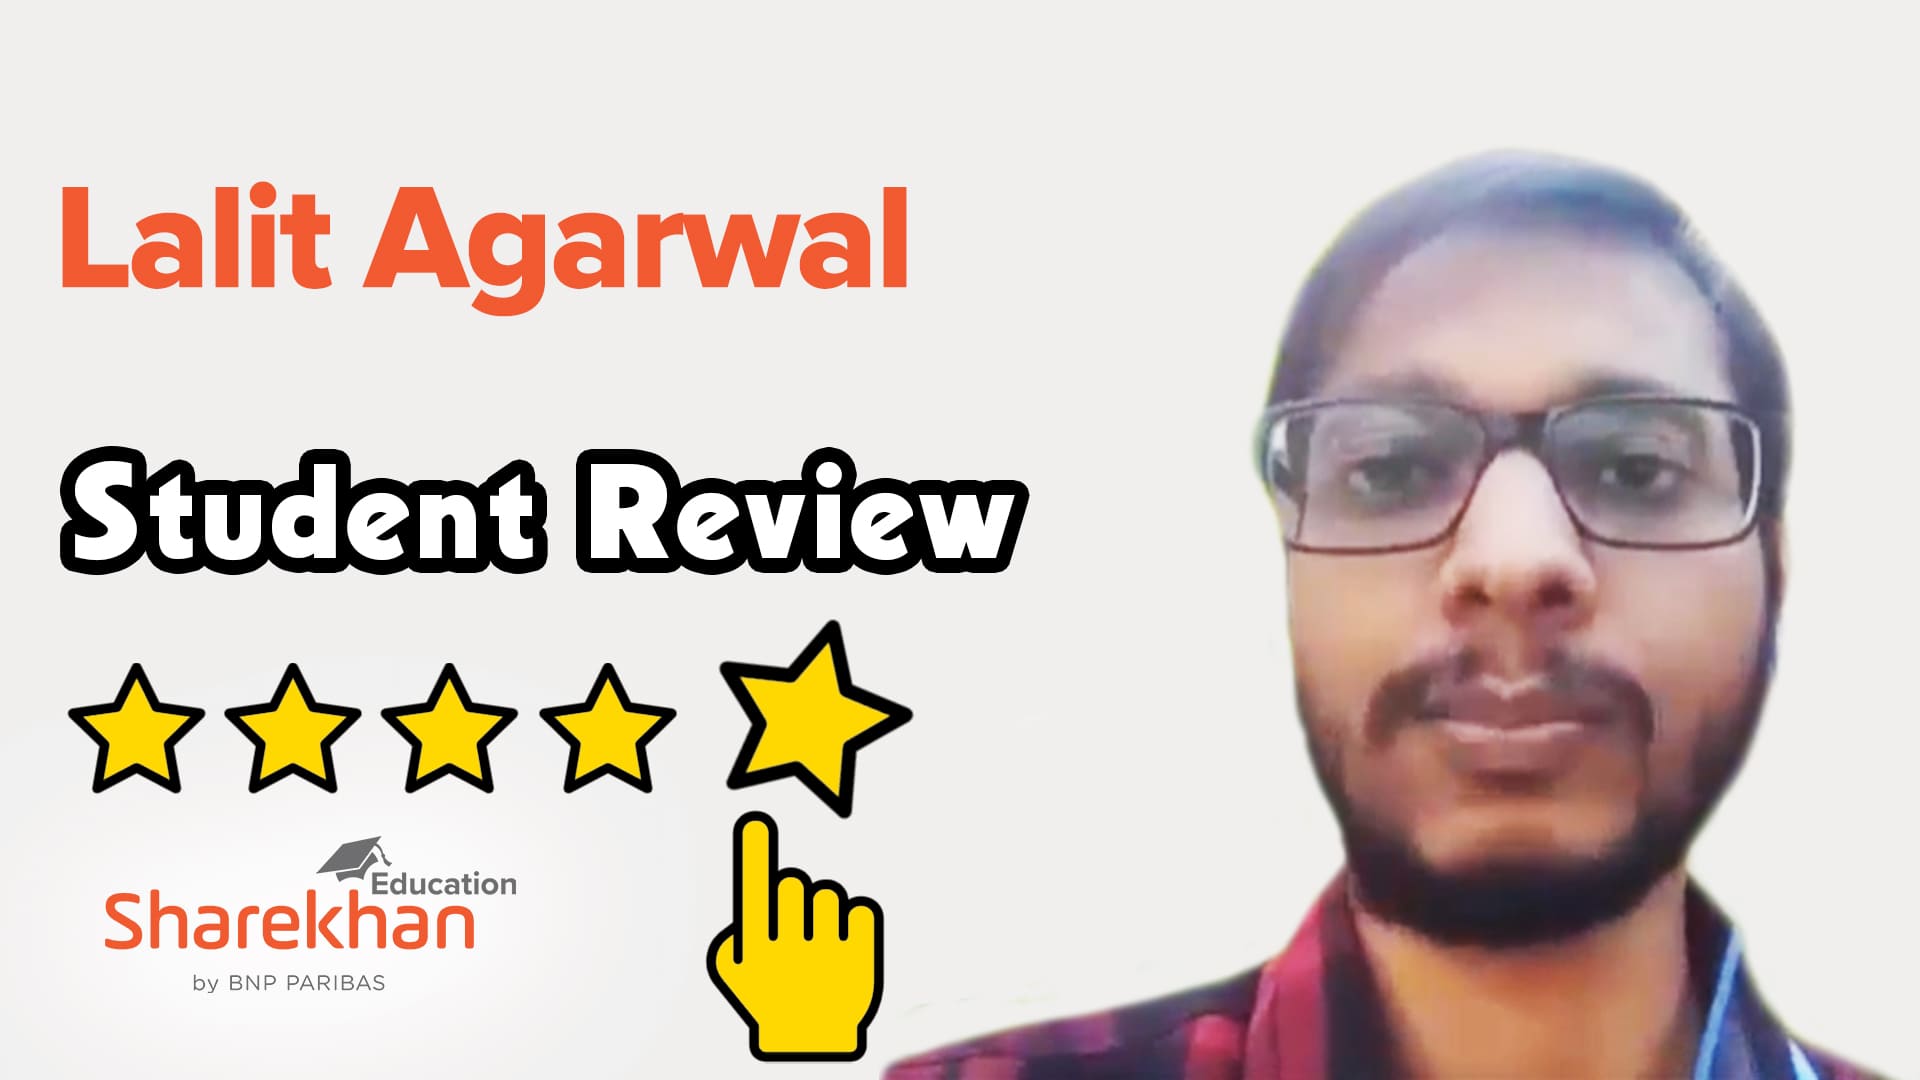 Sharekhan Education Review by Lalit Agarwal